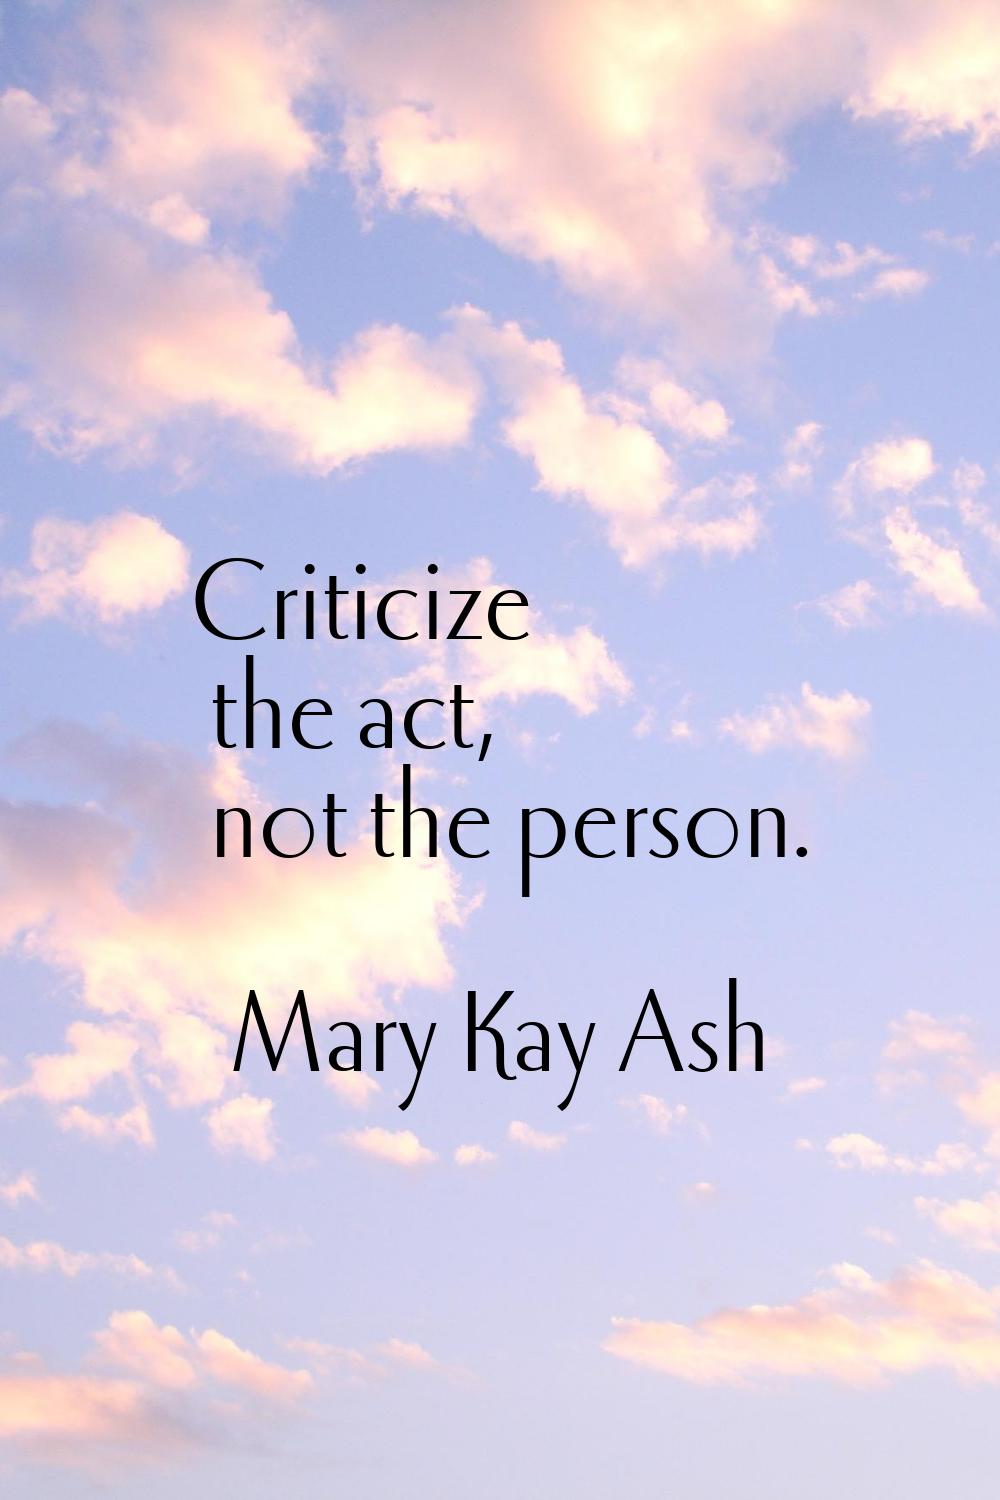 Criticize the act, not the person.